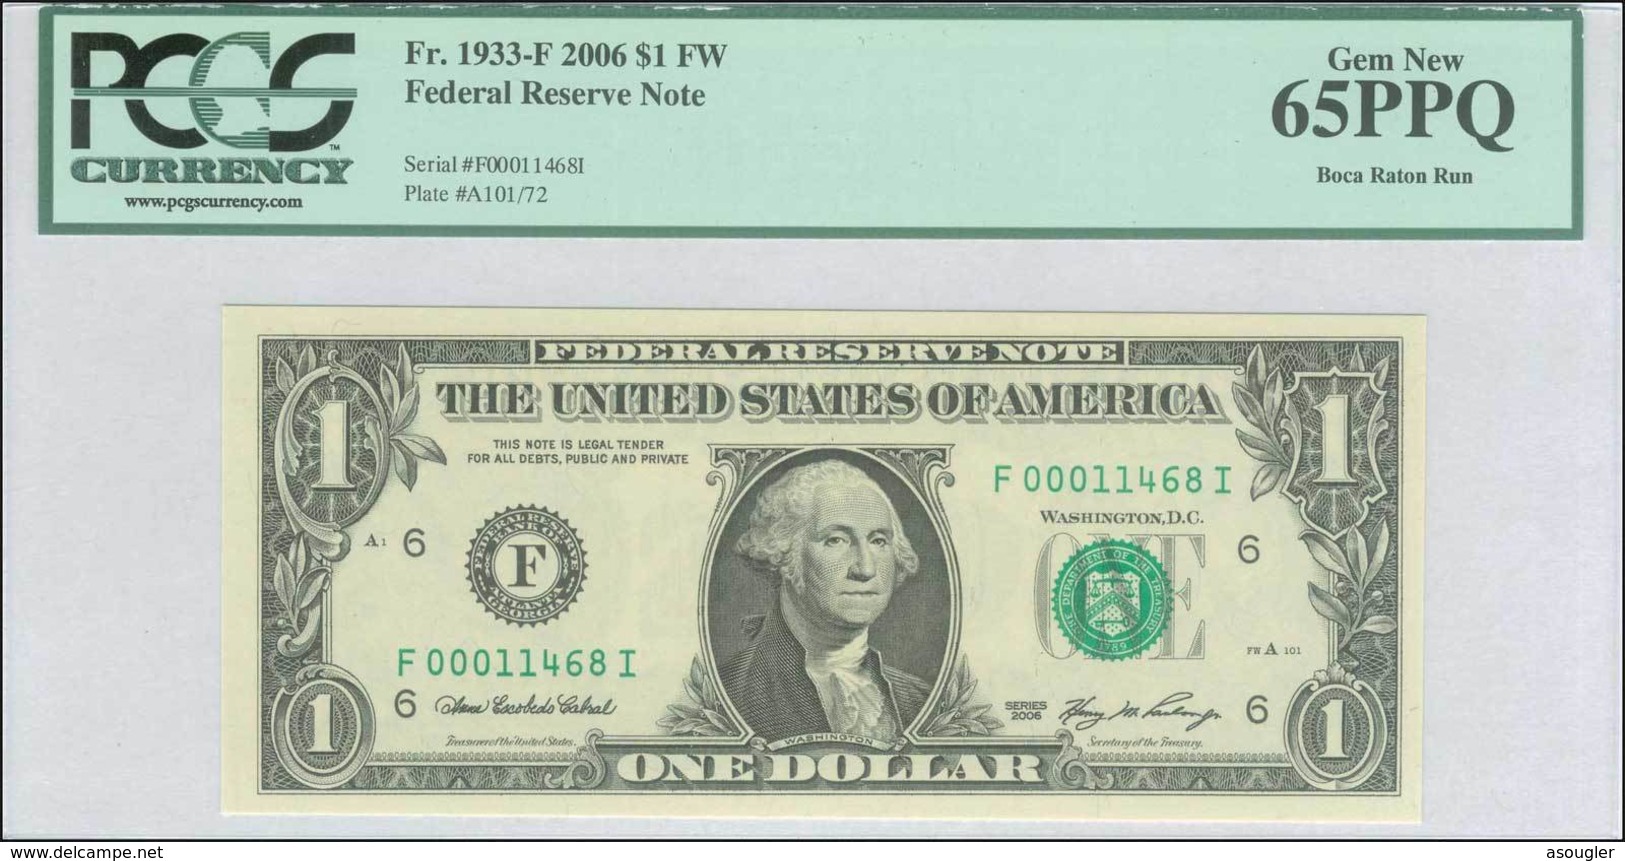 USA 1 Dollar Of Federal Reserve Notes 2006 PCGS Gem New 65 PPQ - Boca Raton Run "free Shipping Via Registered Air Mail" - Federal Reserve (1928-...)